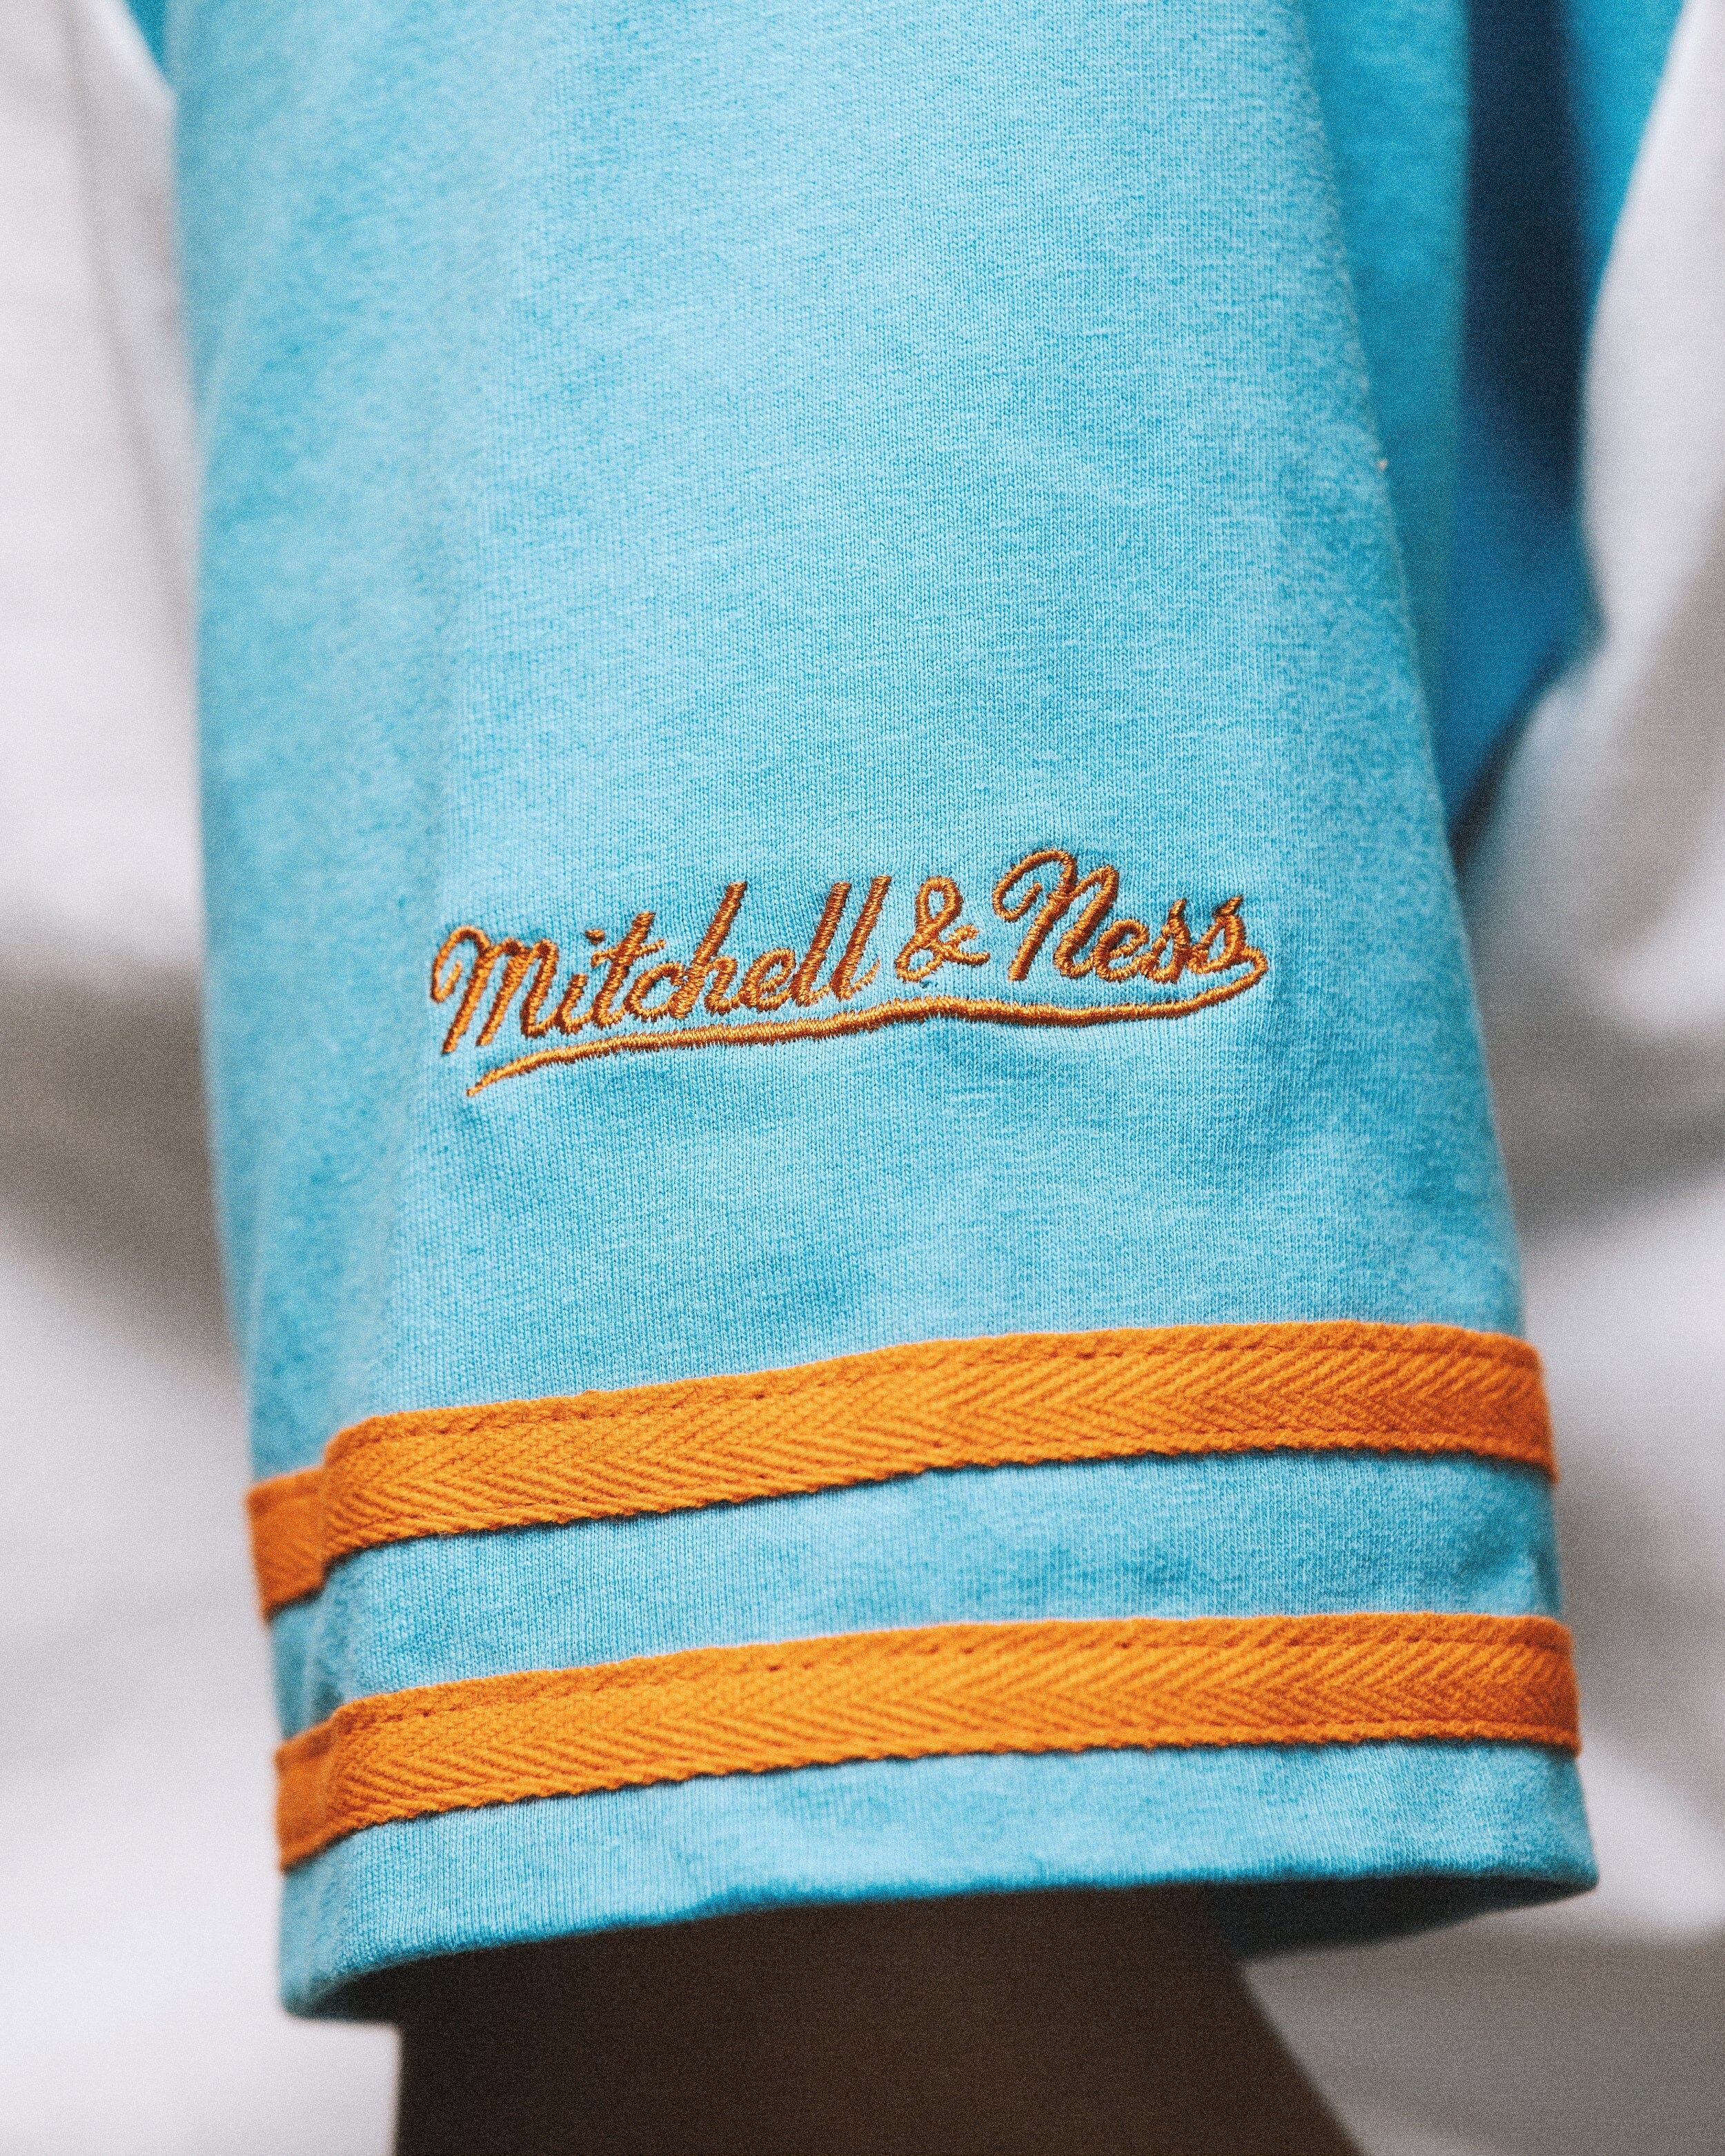 Mitchell & Ness, Tops, Miami Marlins Jersey